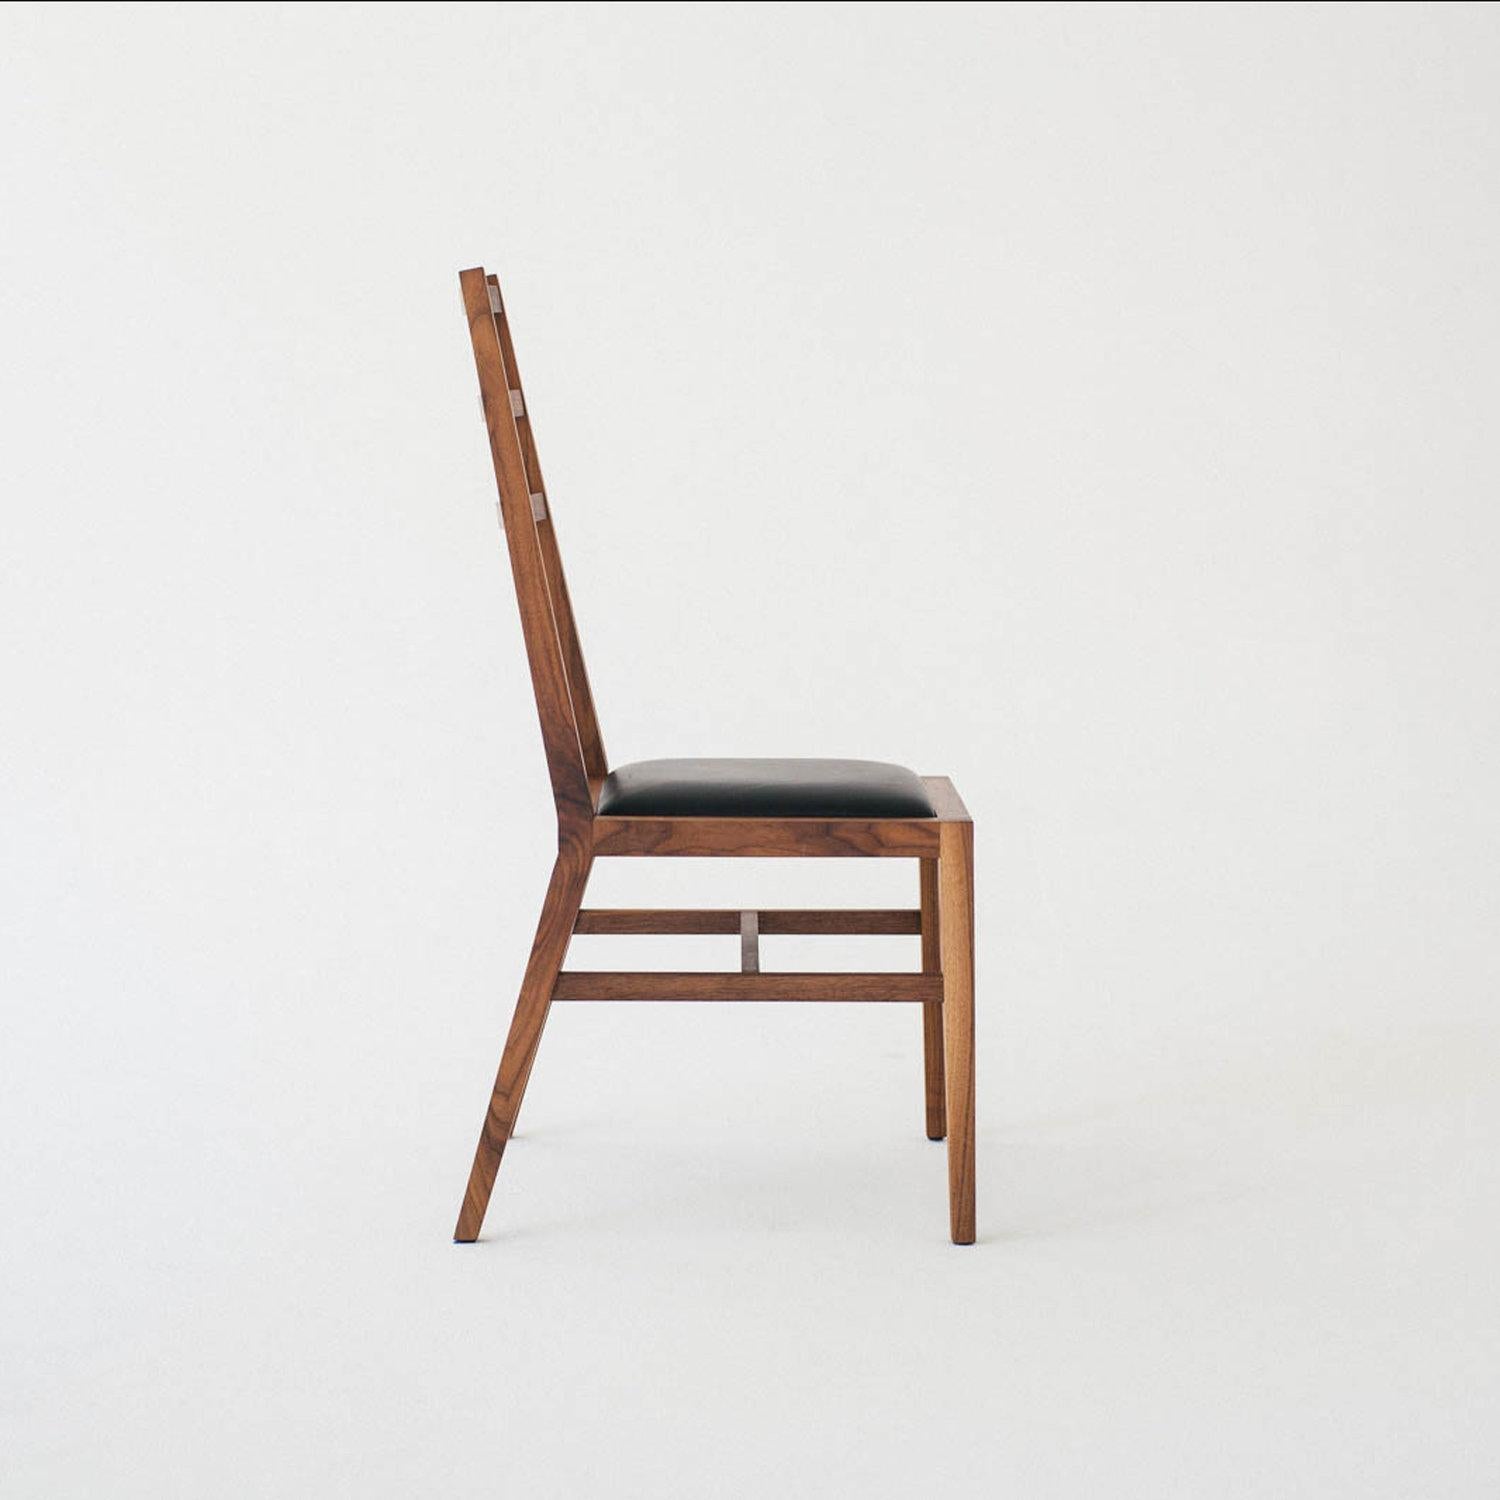 The Bas chair is a minimalist design and a contemporary take on a Shaker ladder-back chair. It features a padded seat and more modern angle with a sit that is slightly more forgiving; all while still carrying the elegance of a formal dining chair.